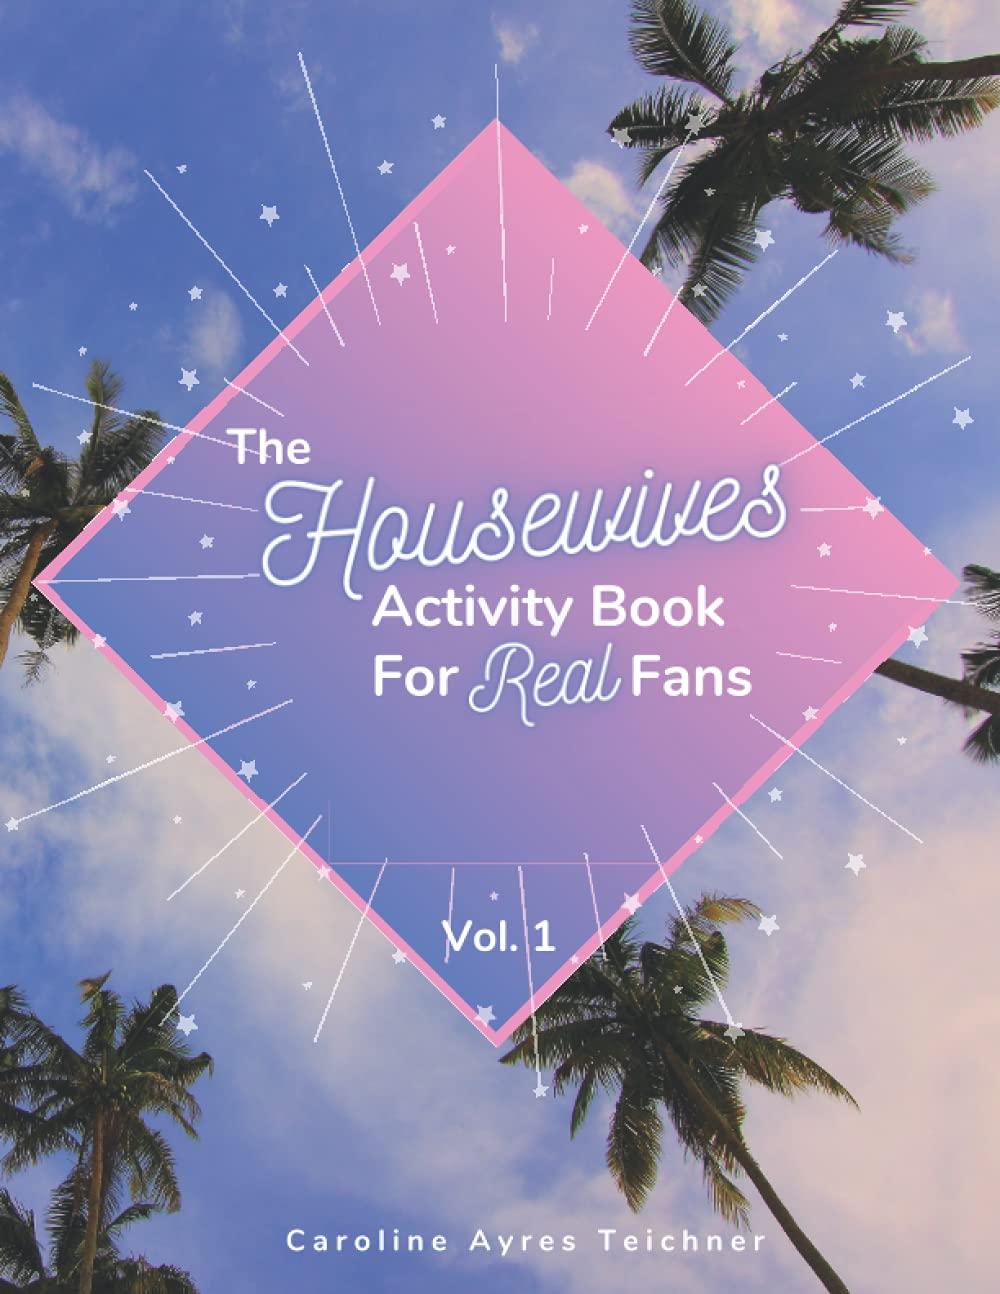 A Housewivws activity book with a pink logo and palm trees